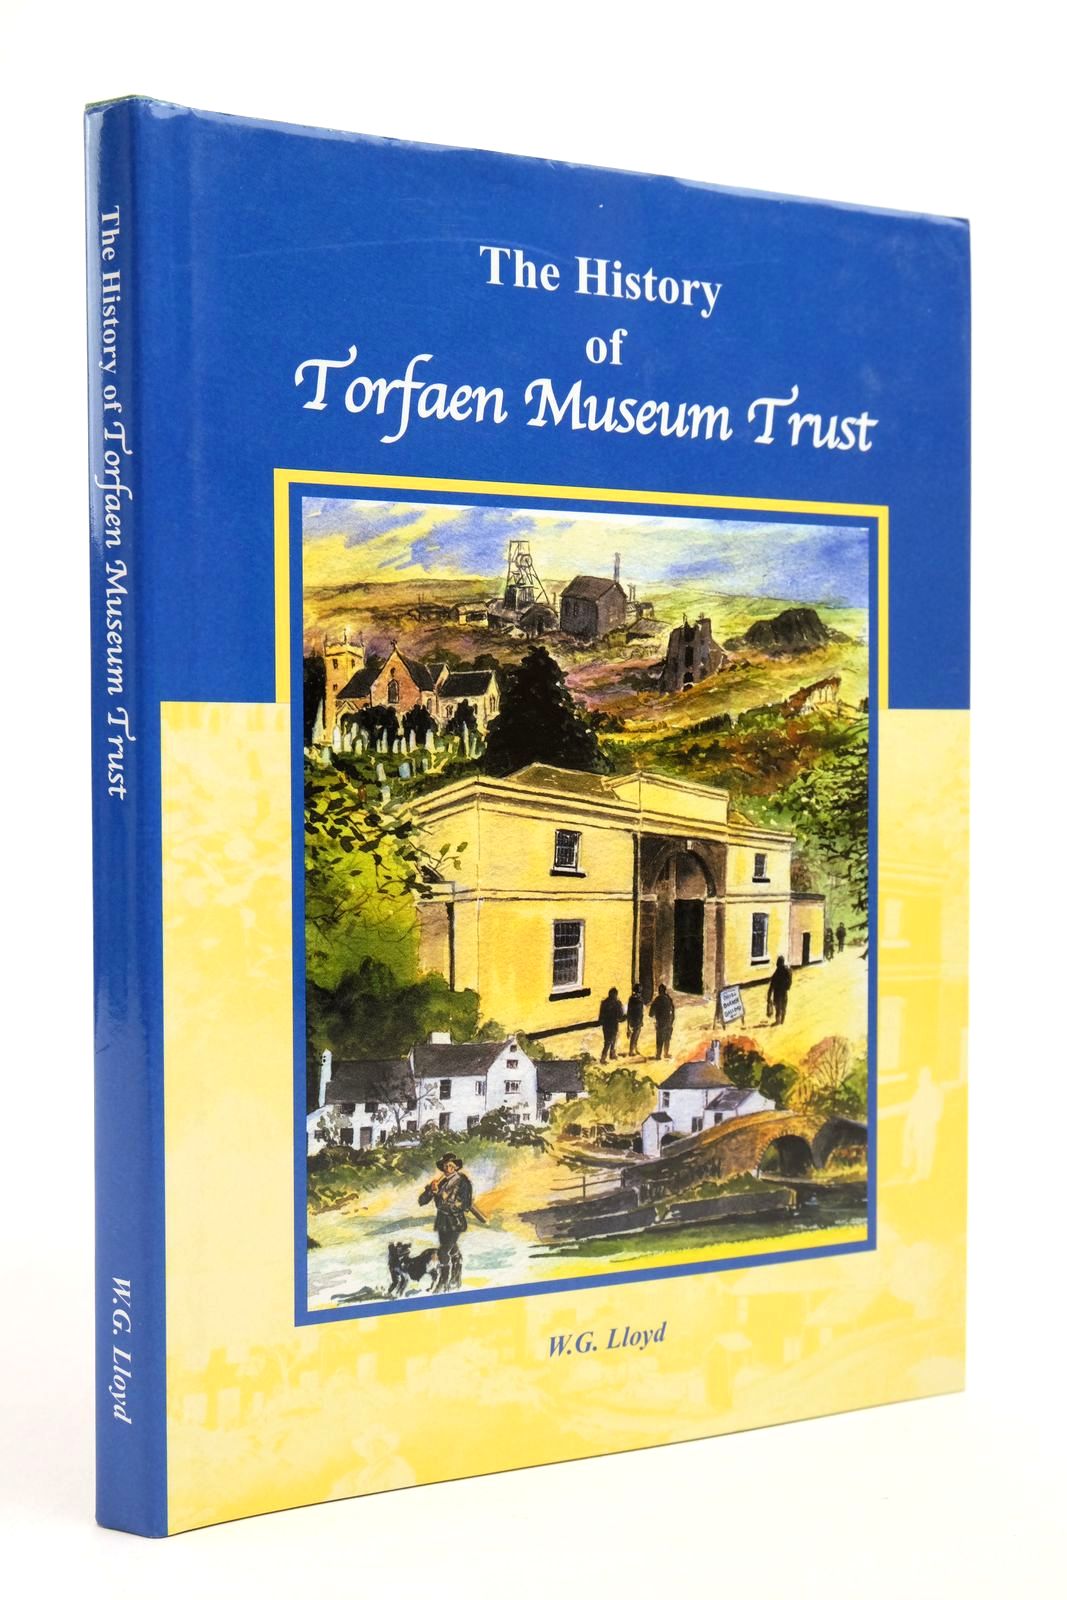 Photo of THE HISTORY OF TORFAEN MUSEUM TRUST- Stock Number: 2140670